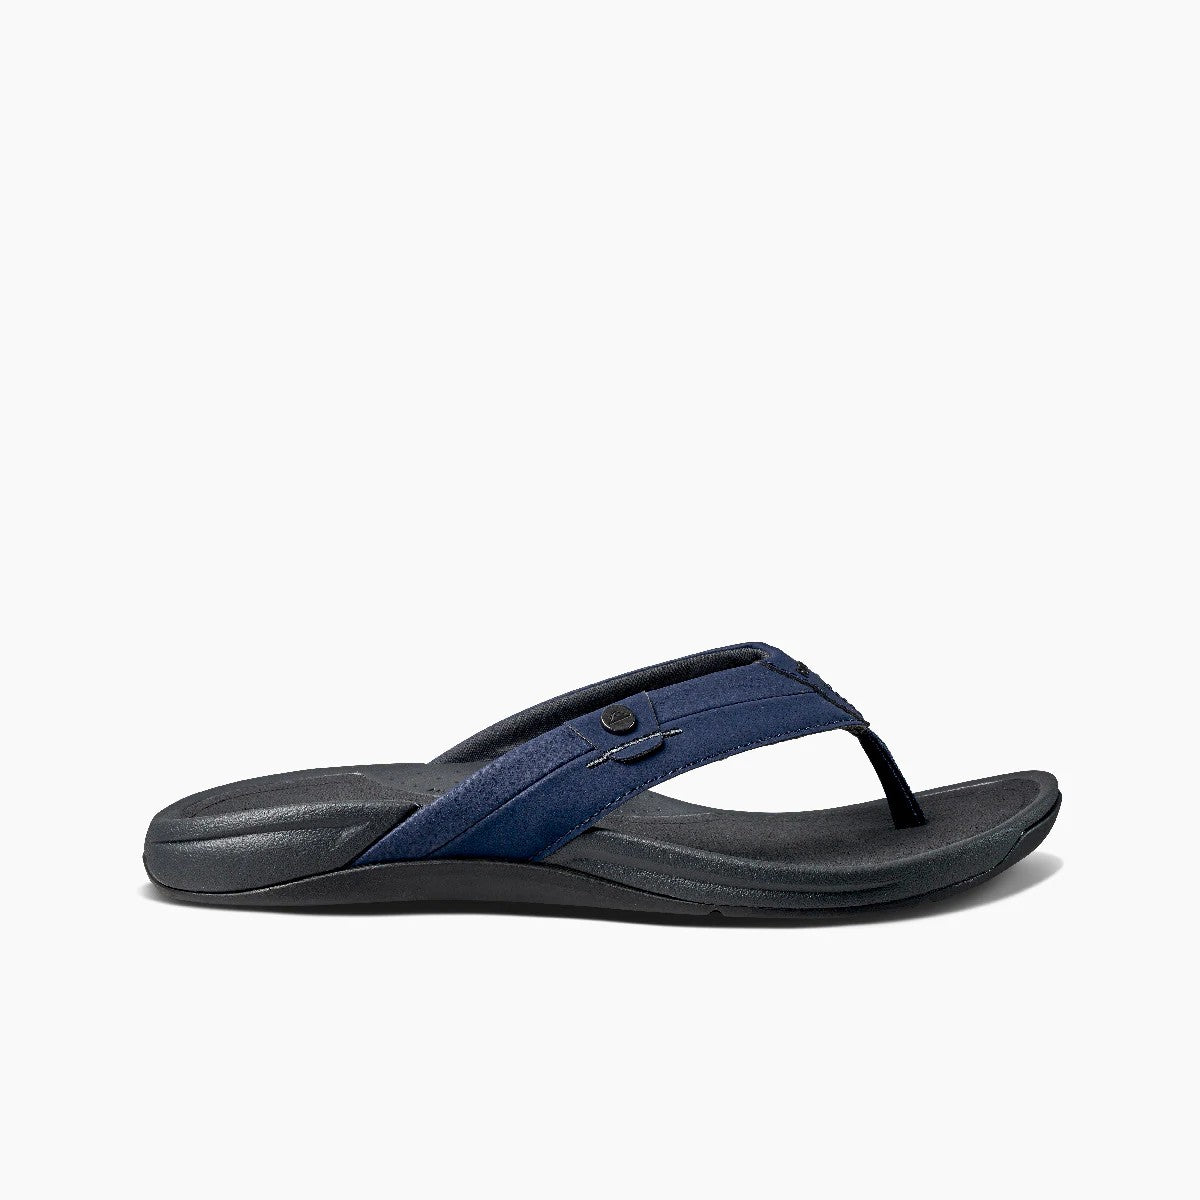 Reef Pacific Sandals